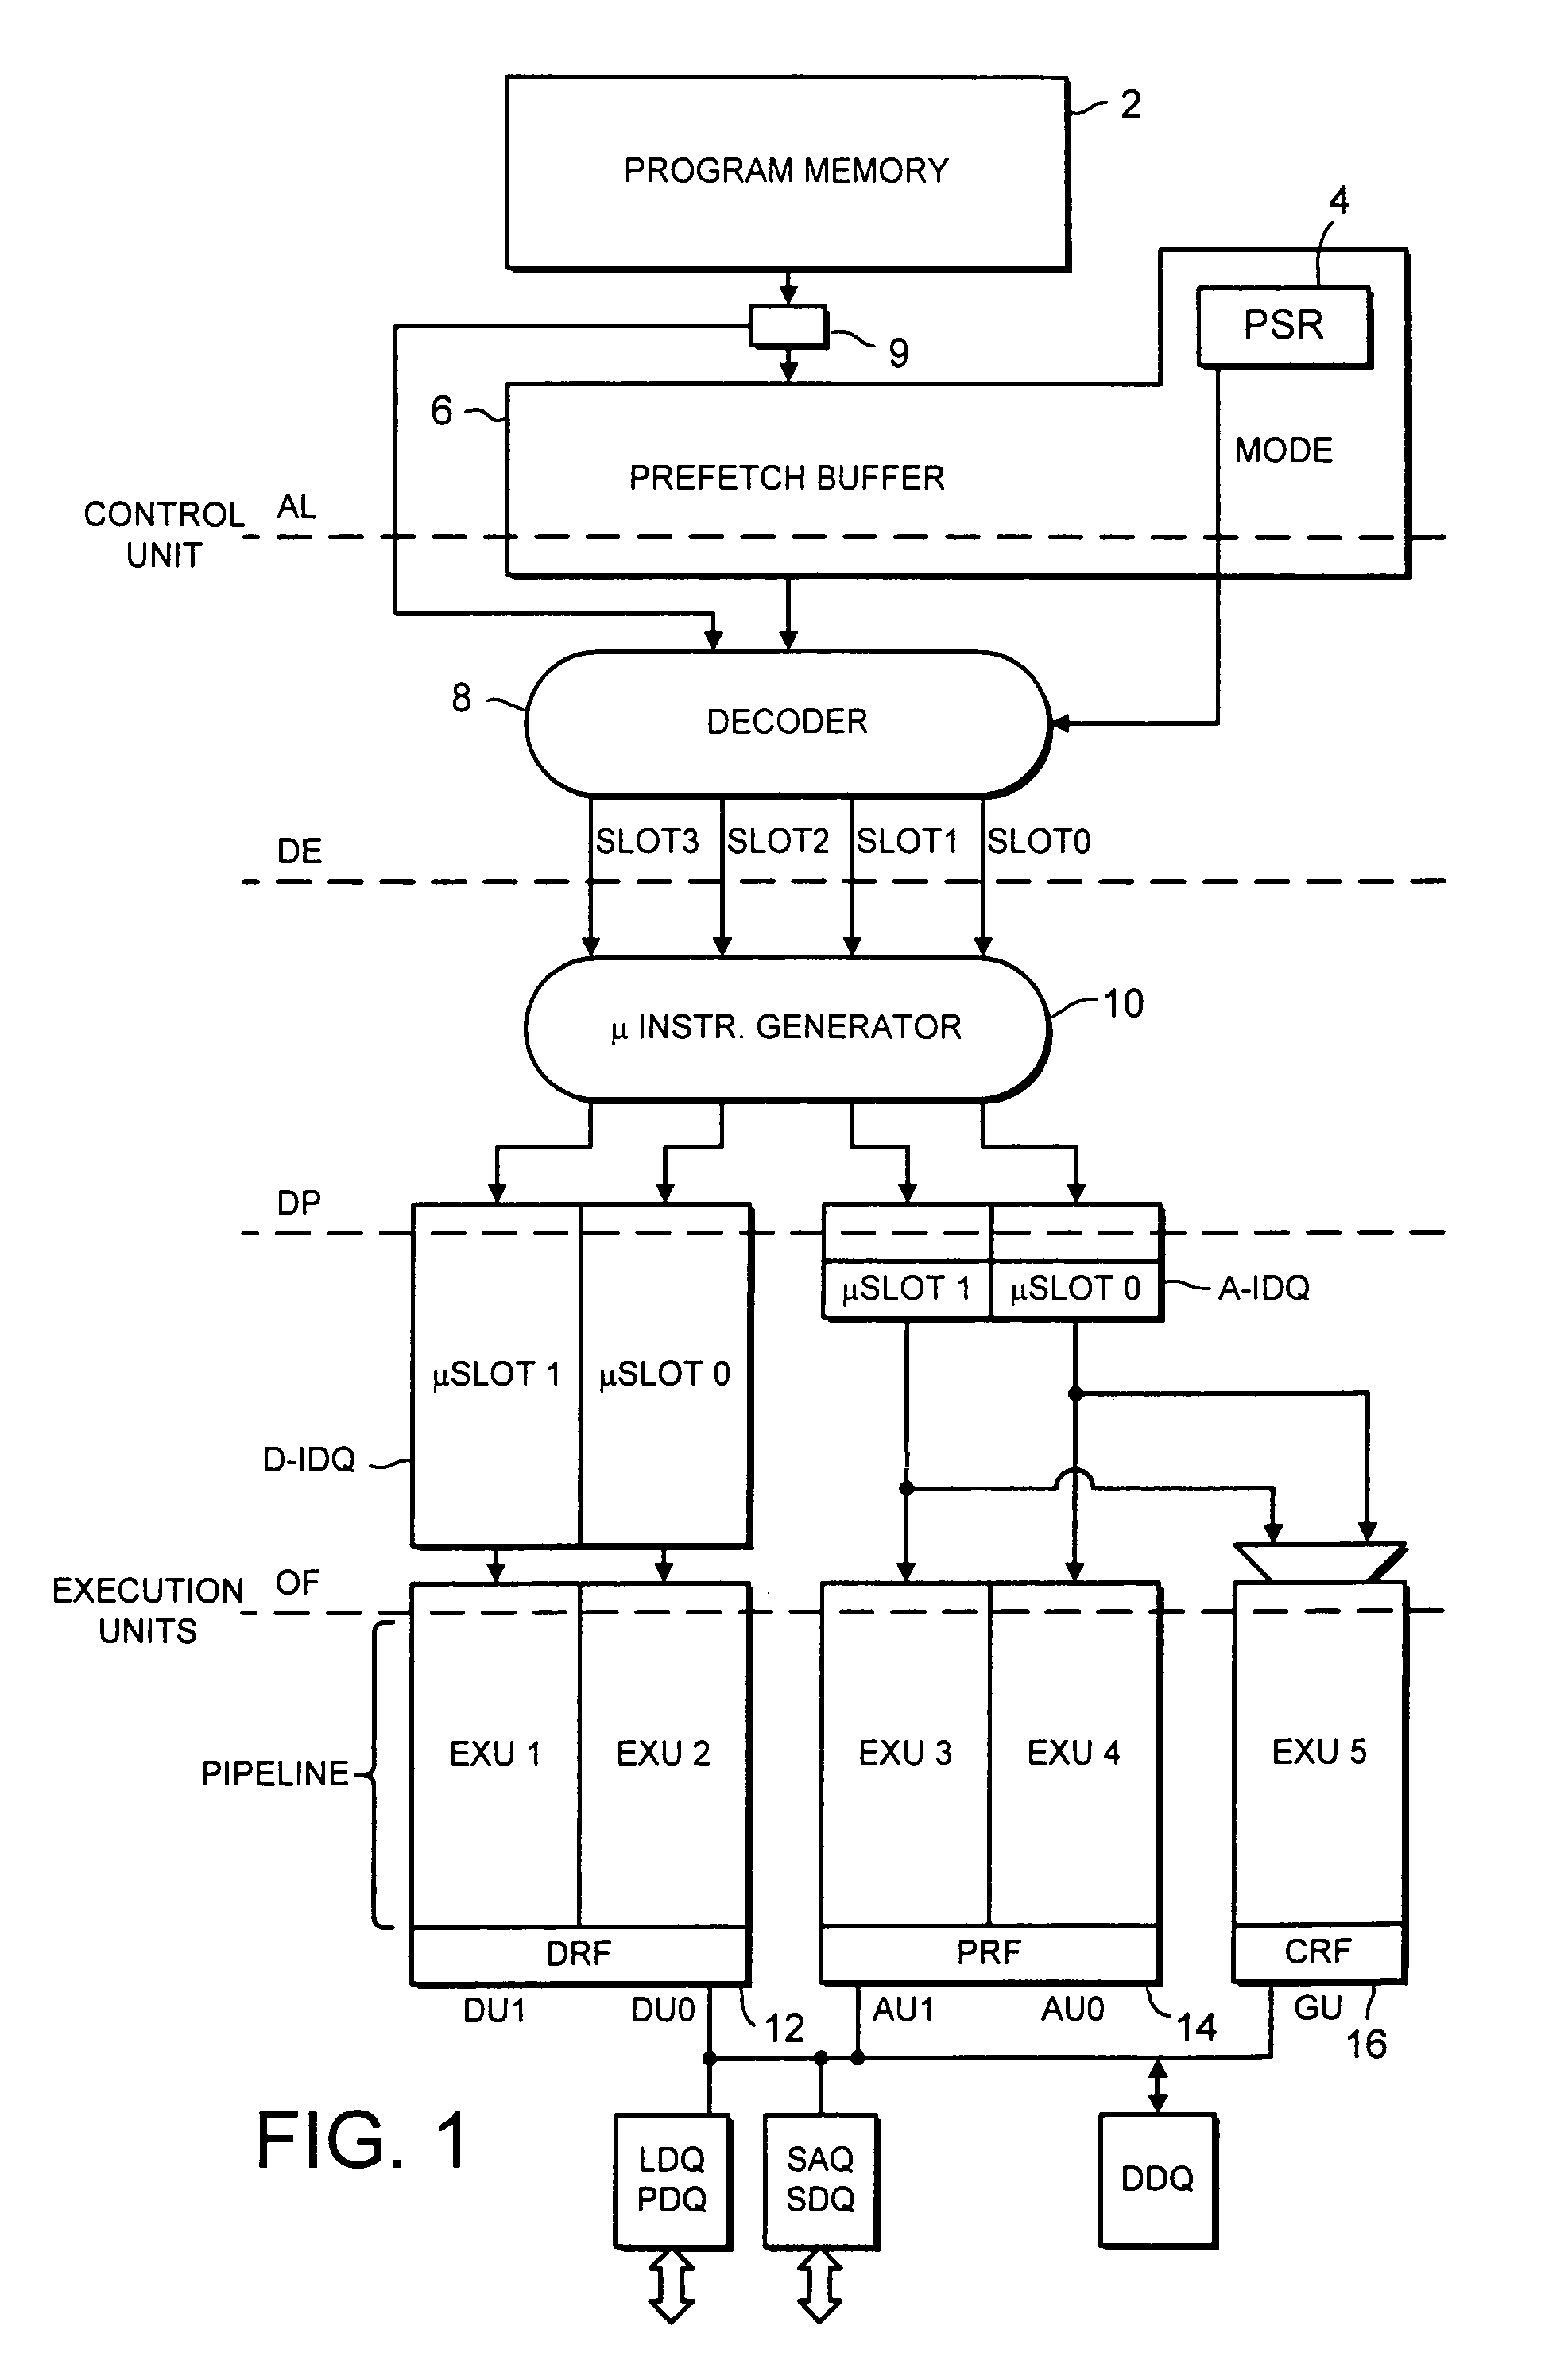 Multiple execution of instruction loops within a processor without accessing program memory